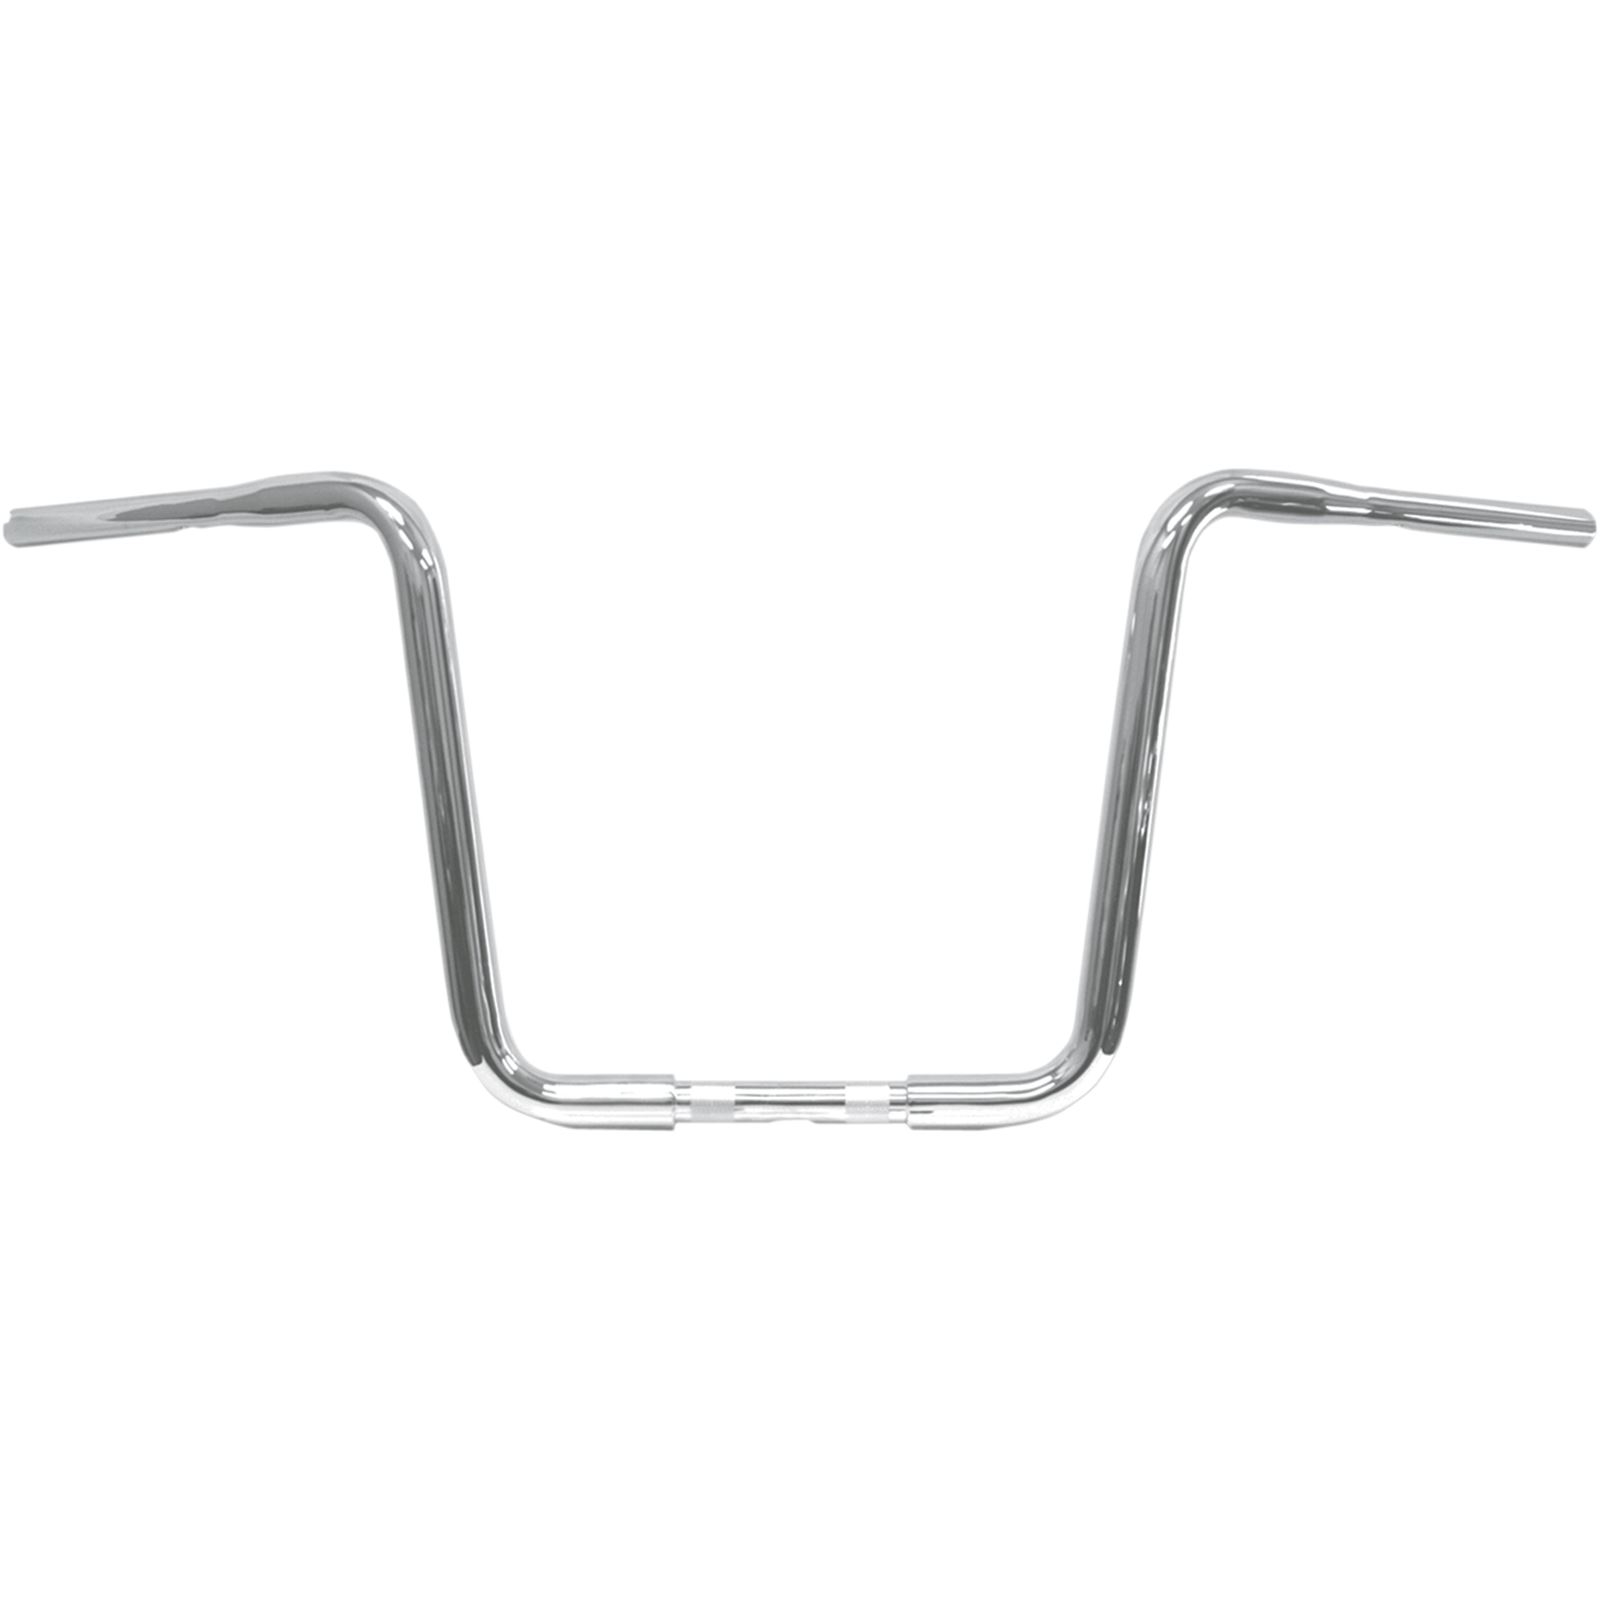 LA Choppers Chrome 12" Ape Hanger Handlebar for Throttle-by-Wire